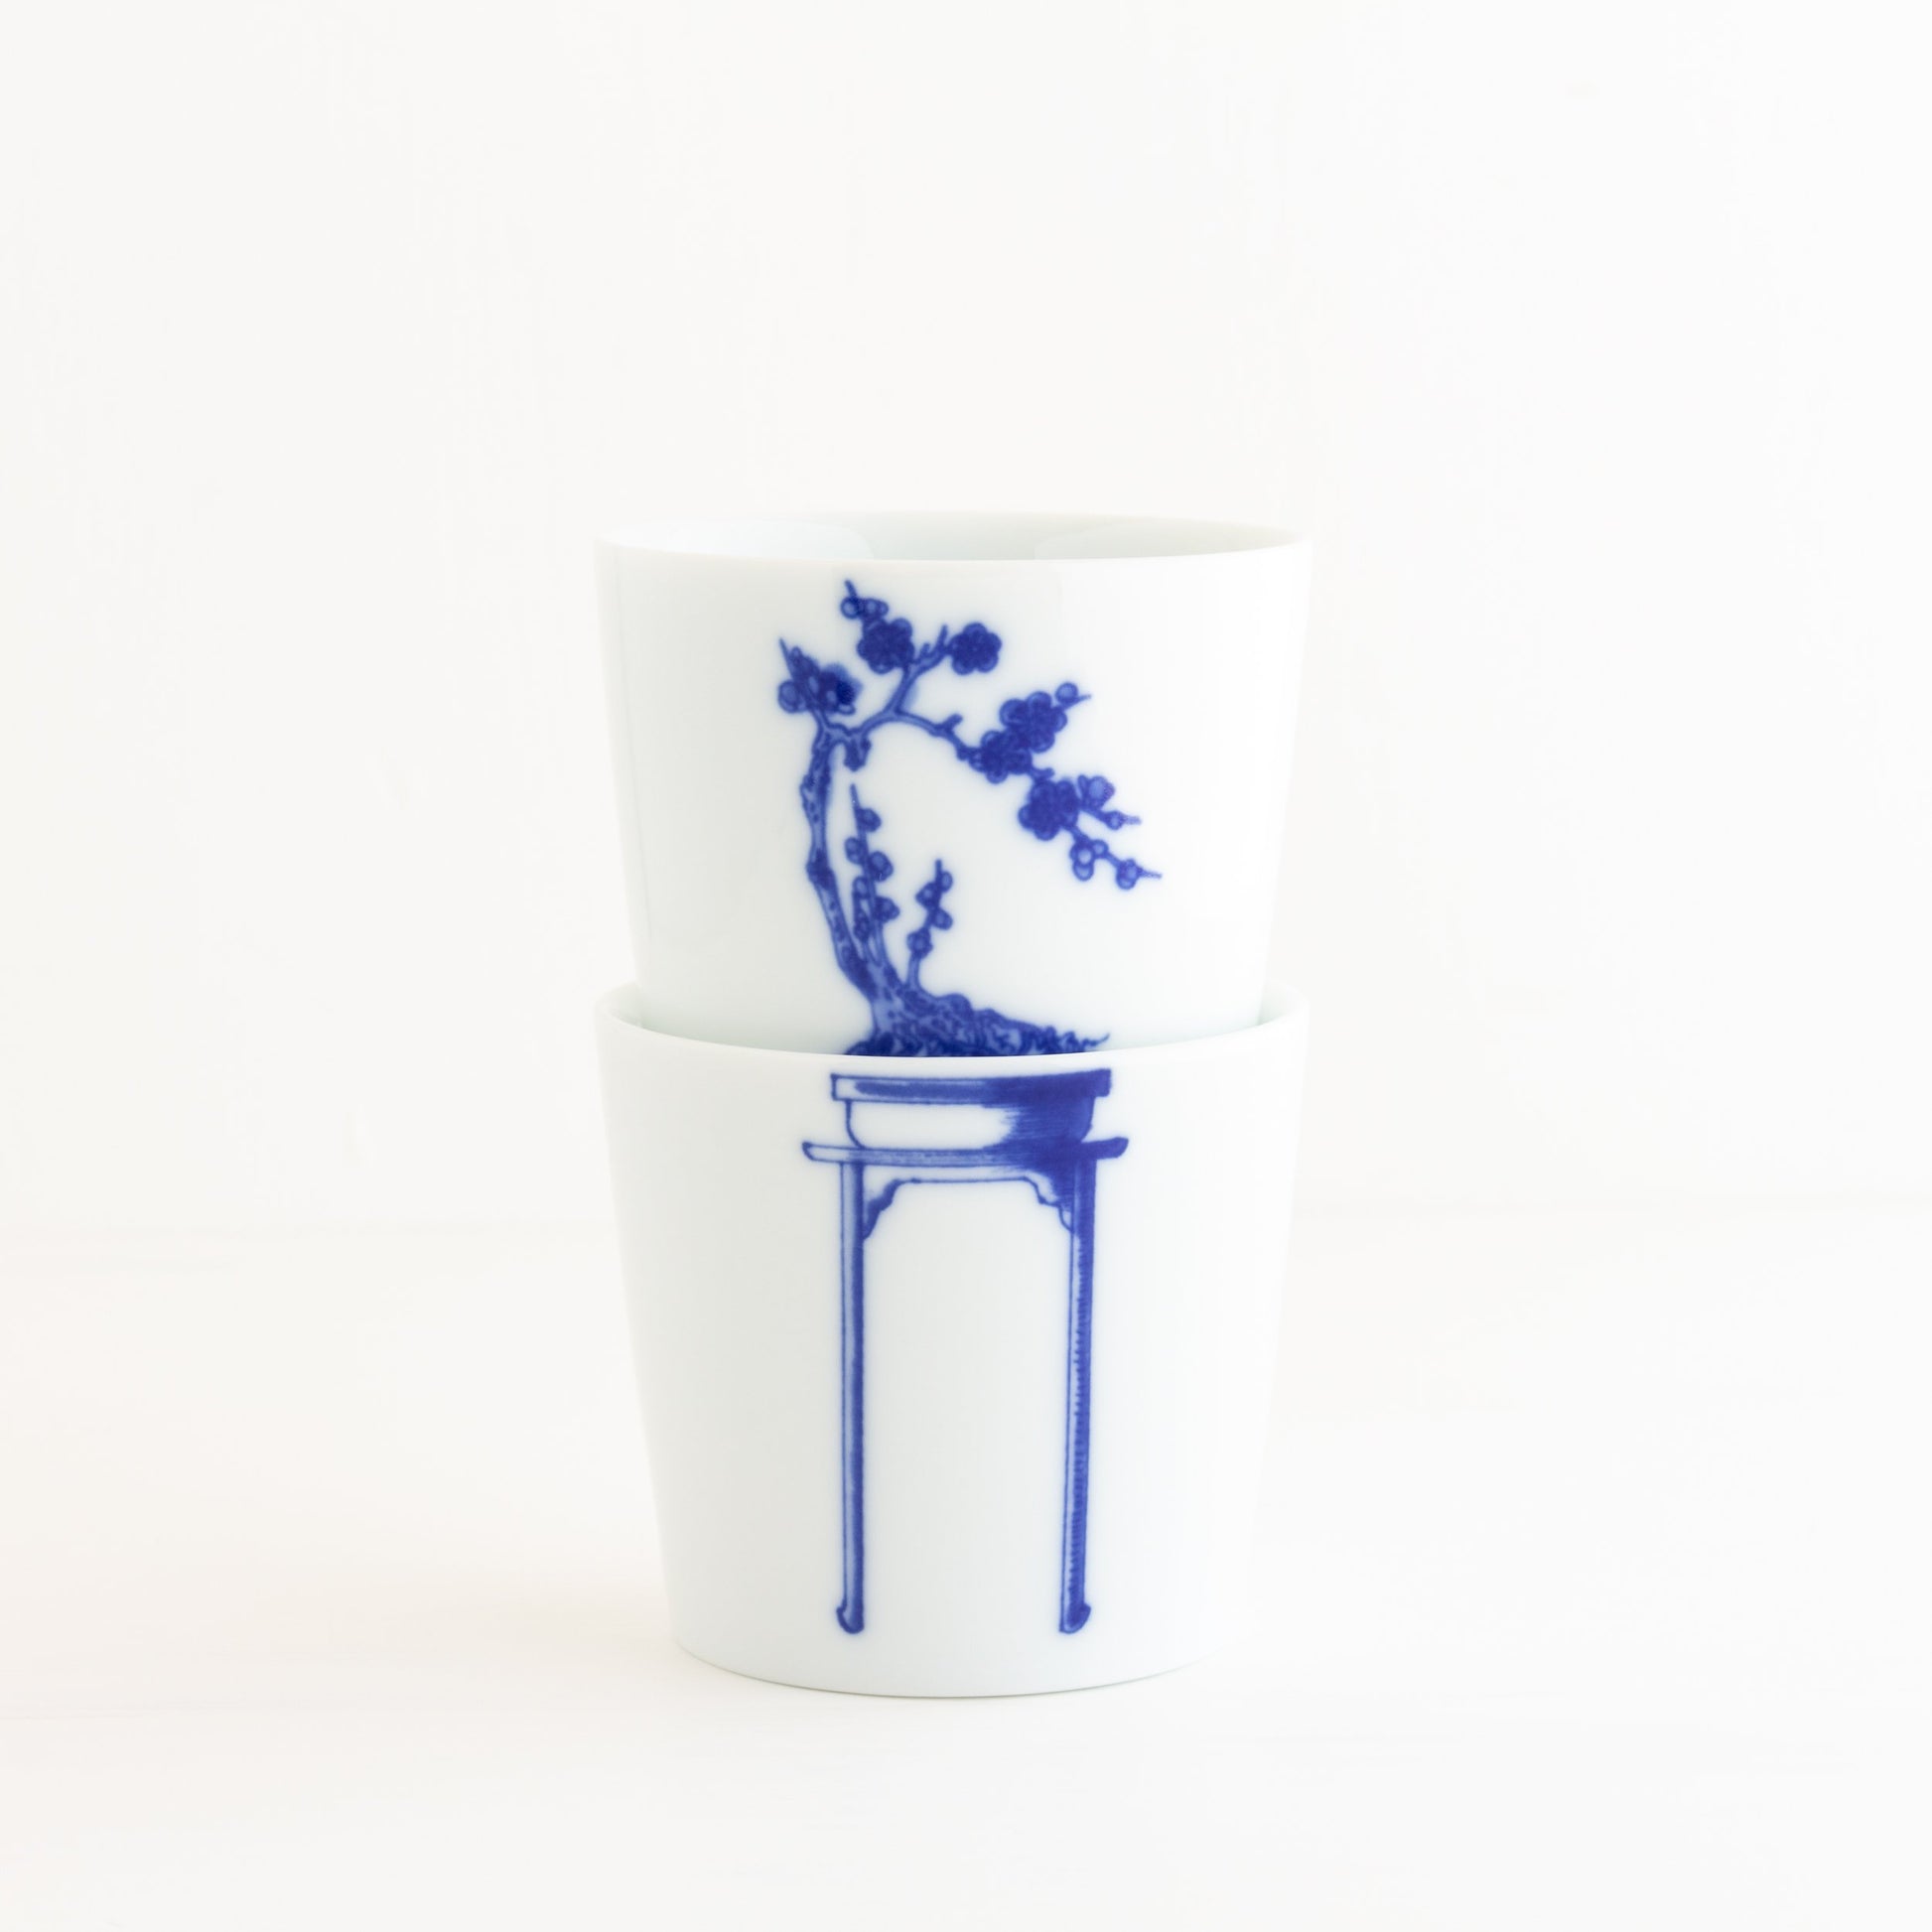 Bonsai Cups - Plum Blossom design, showing two cups stacked together